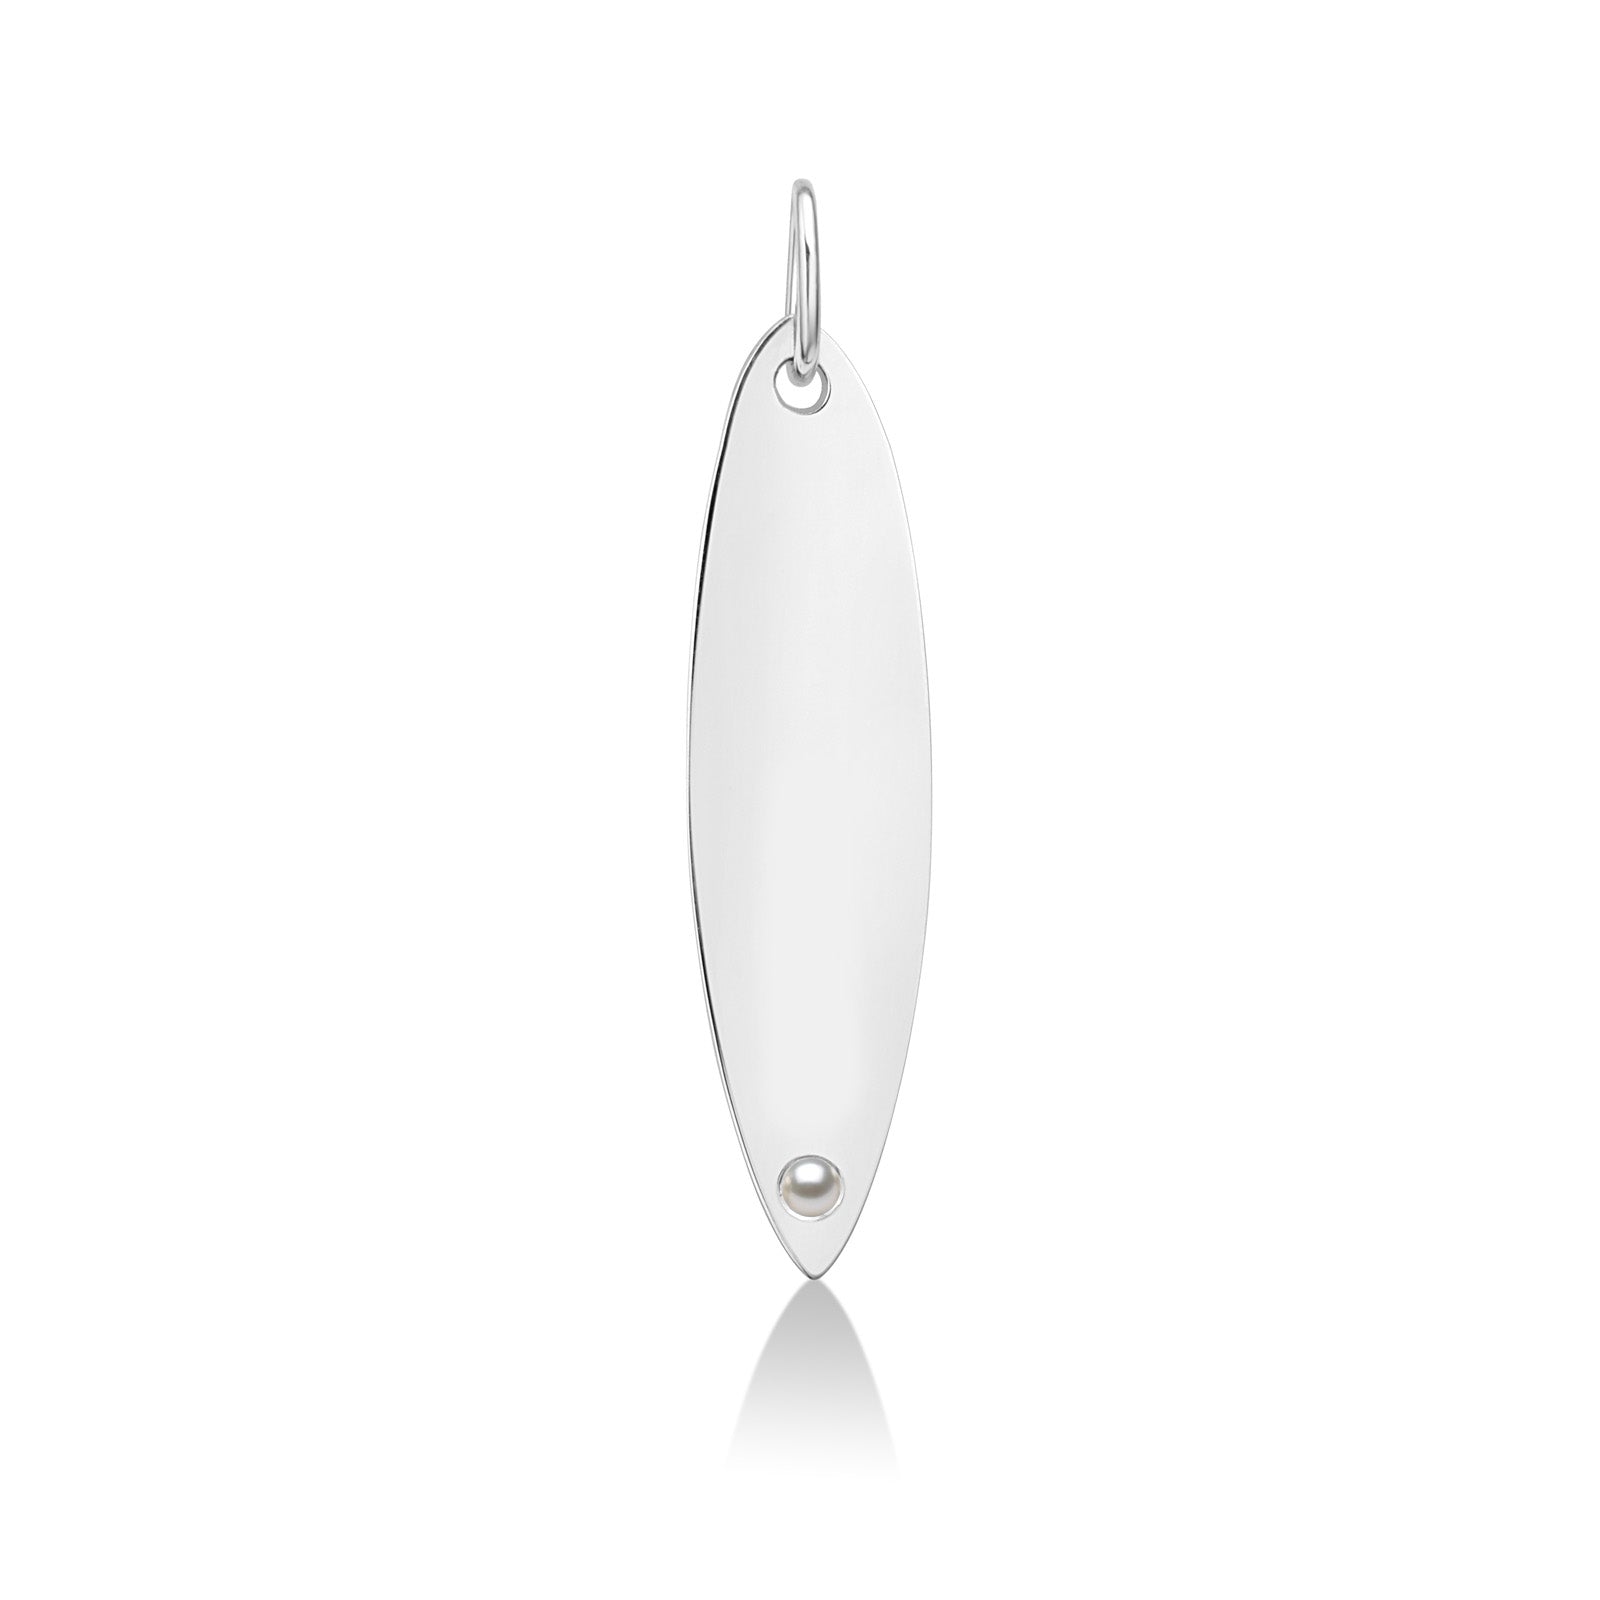 14k white gold surfboard charm lock with pearl